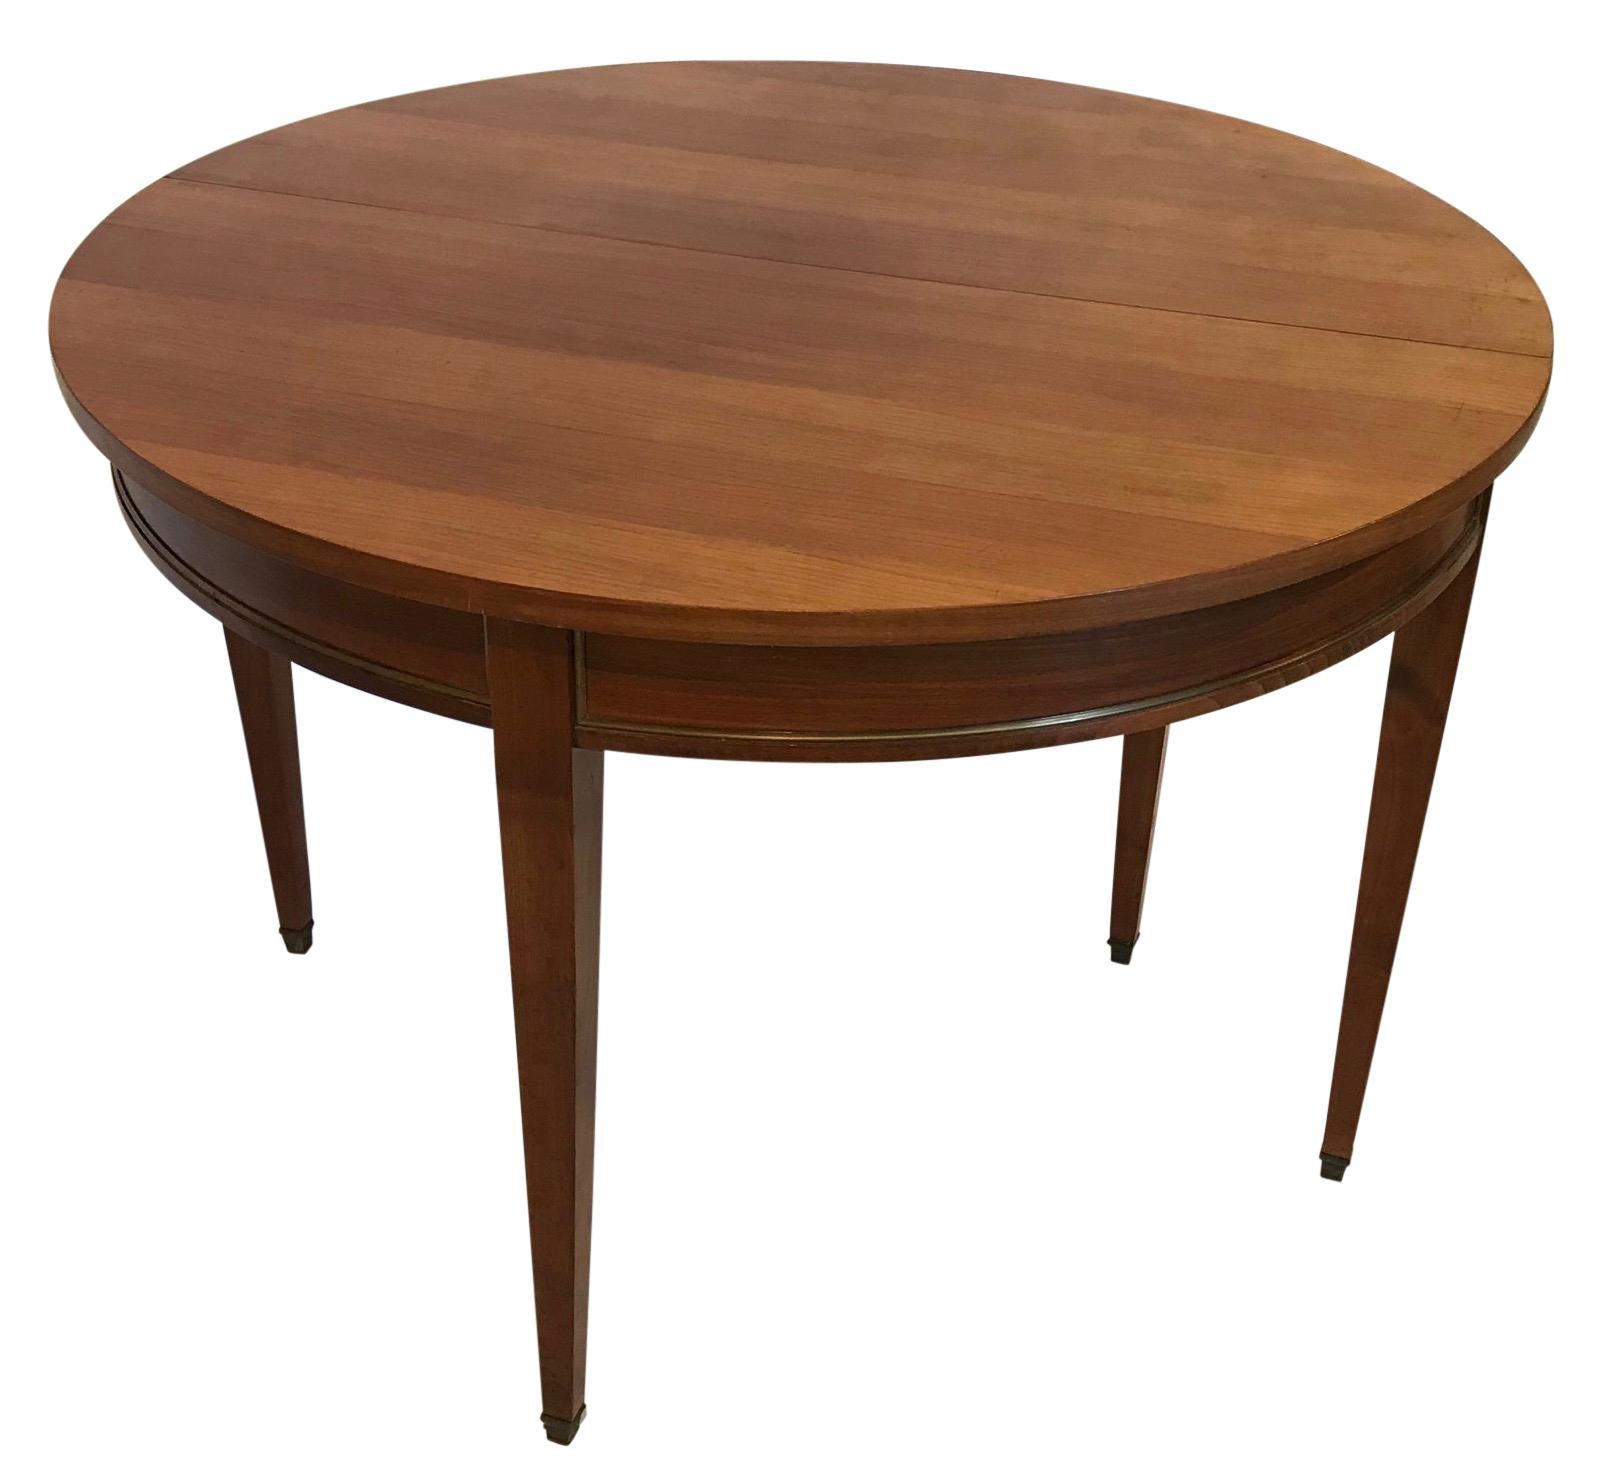 Custom made in France about 30 years ago, Directoire style cherrywood demilune table with brass accent.
When the table is open the diameter is 43.5 inches. Height of the table when open is 29.5 inches
Beautiful quality.
Last quarter of the 20th